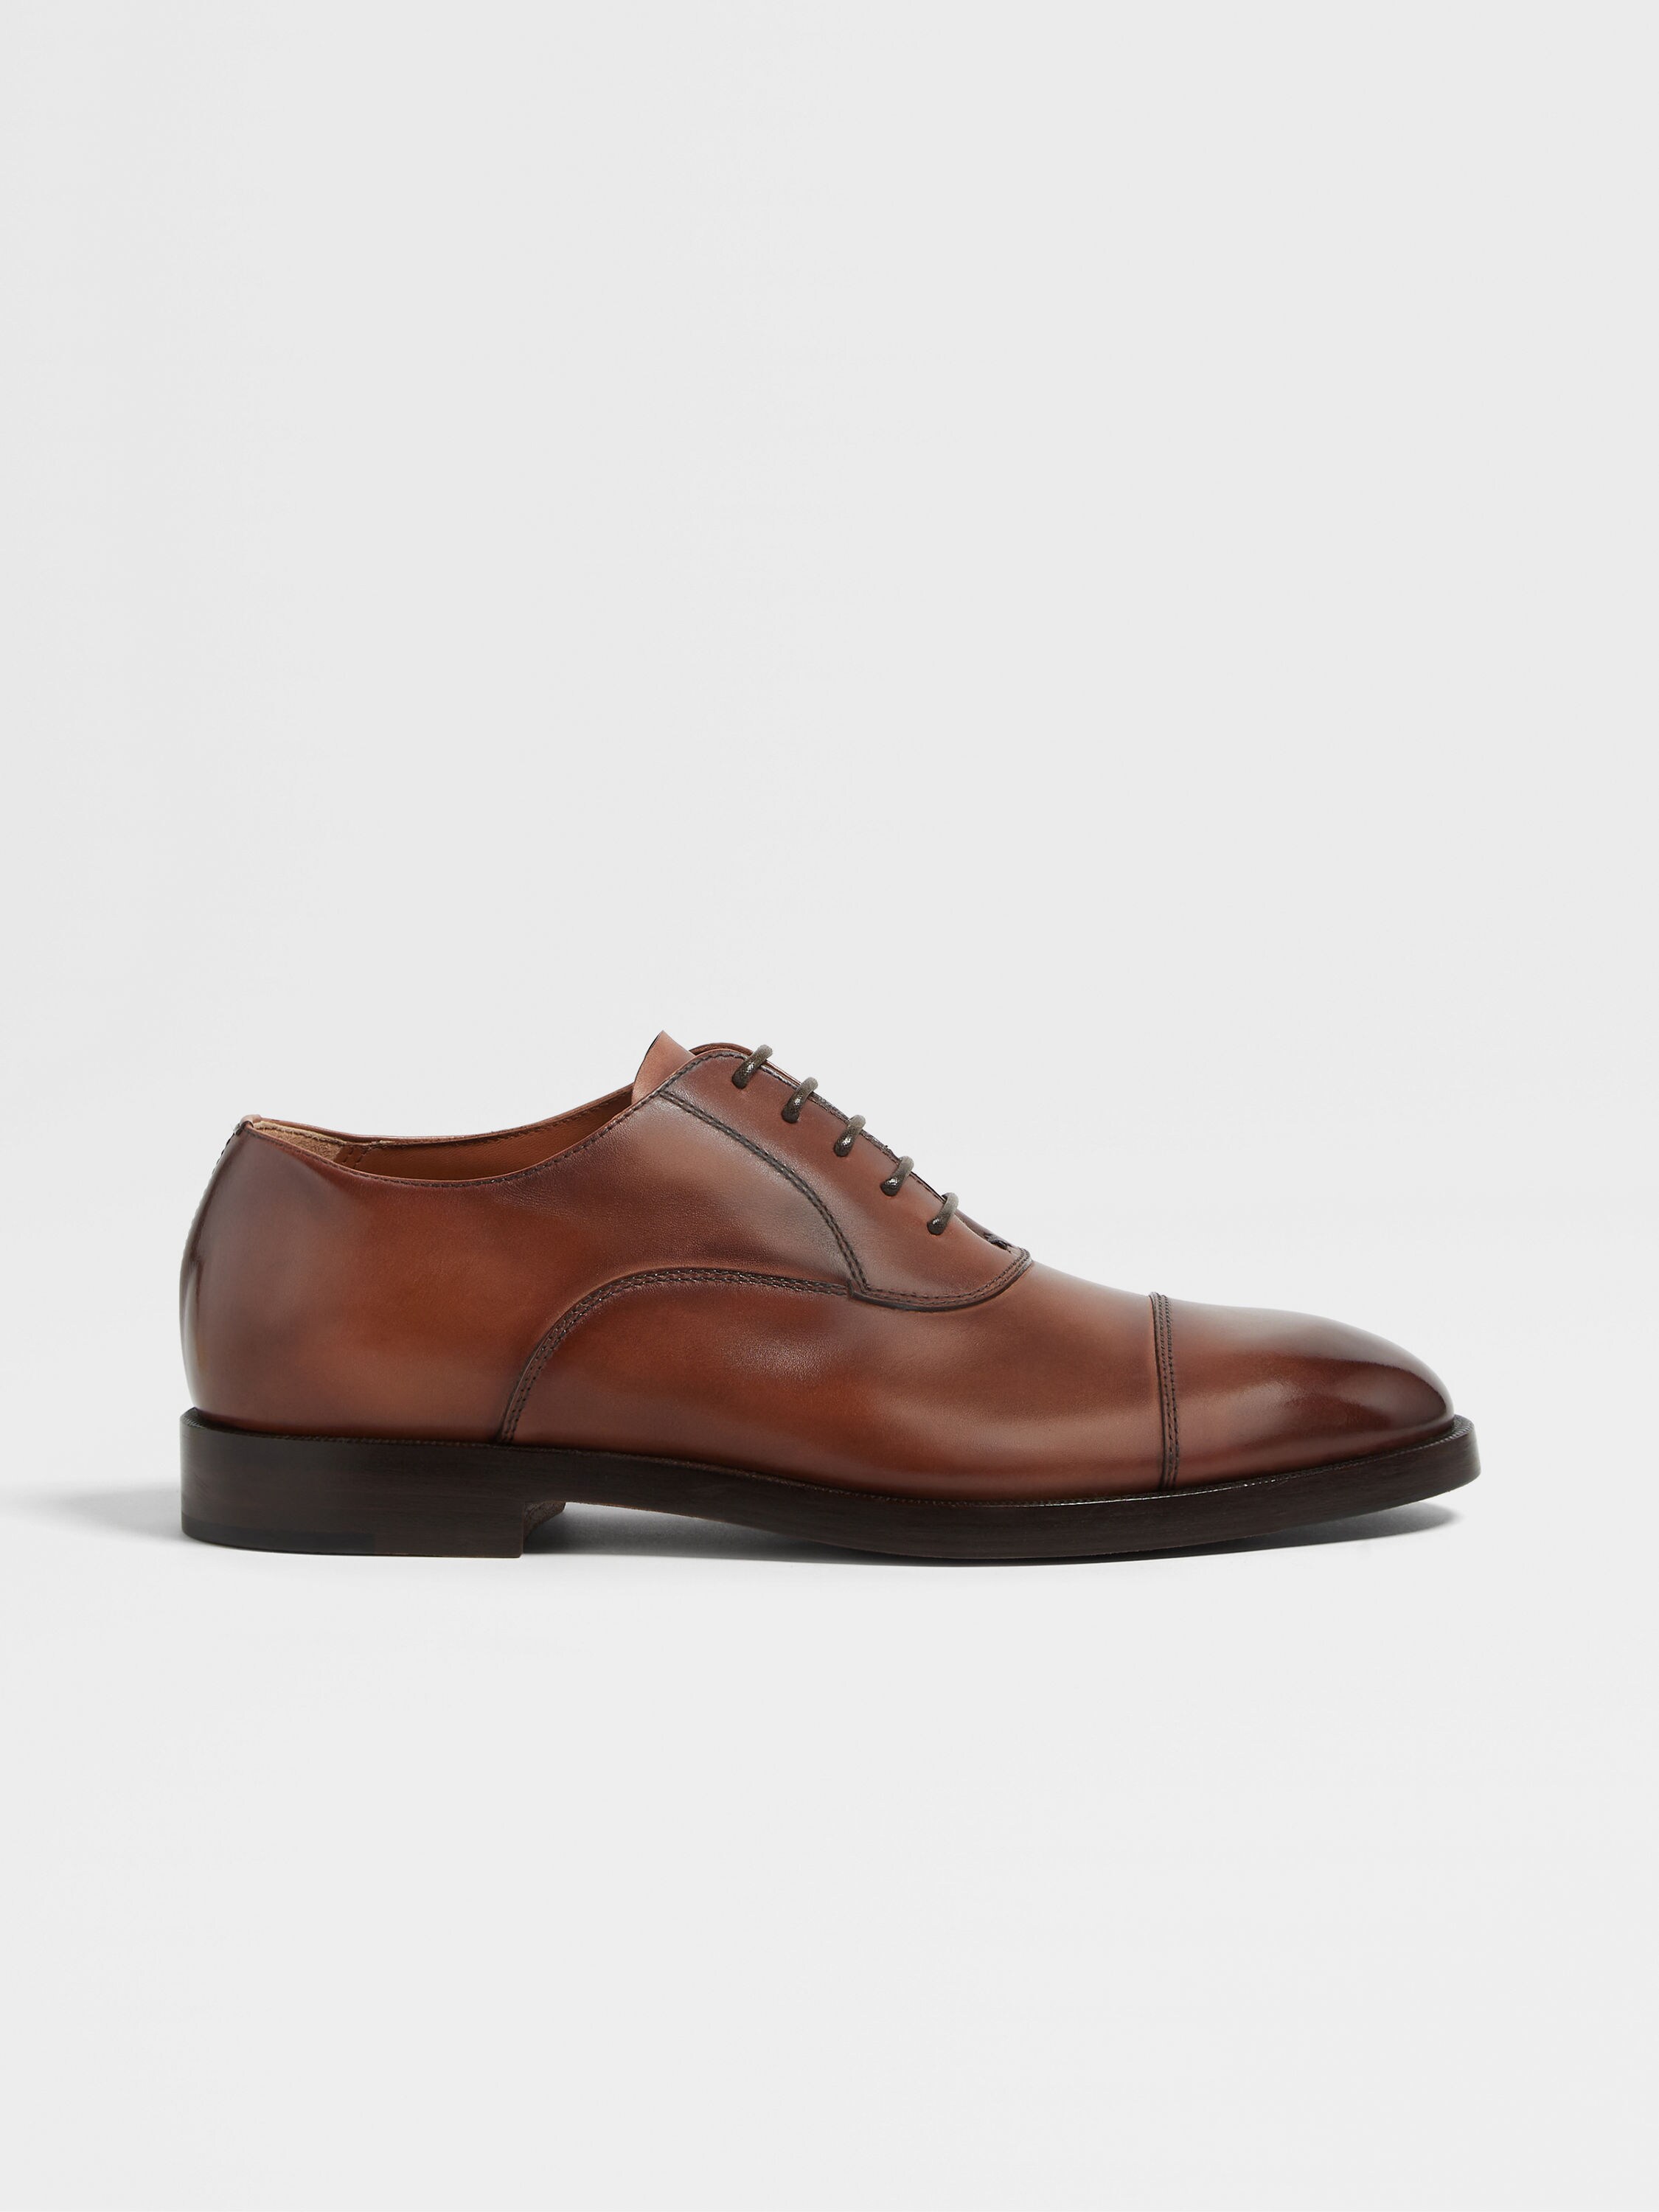 Light Brown Leather Torino Oxford Shoes FW24 28770890 | Zegna US